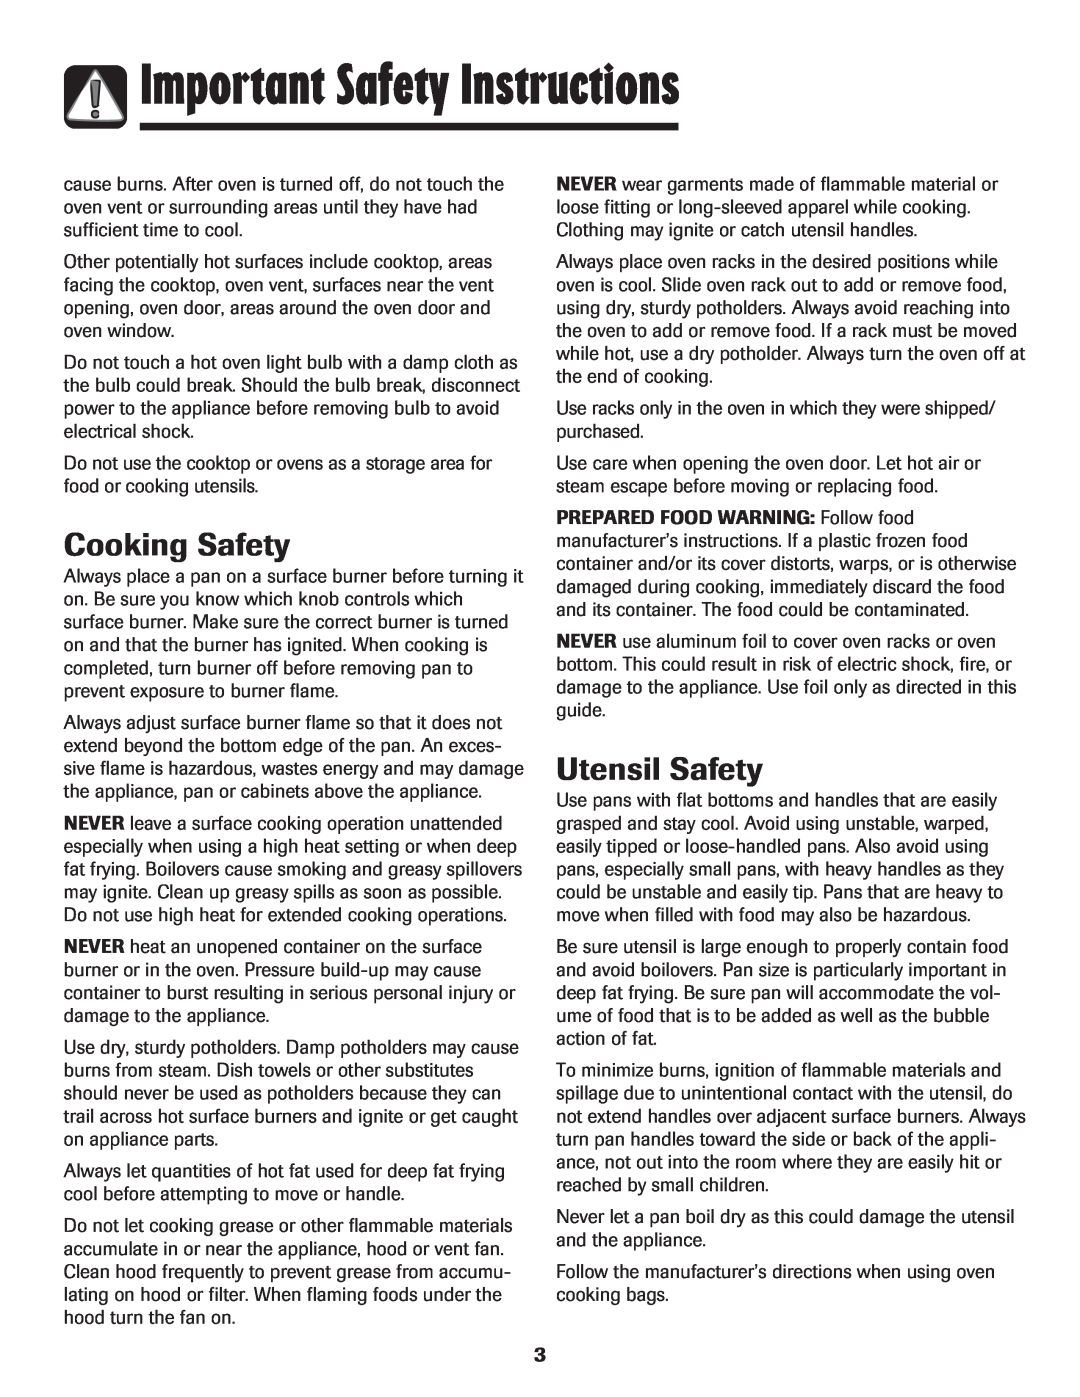 Amana 8113P515-60 manual Cooking Safety, Utensil Safety, Important Safety Instructions 